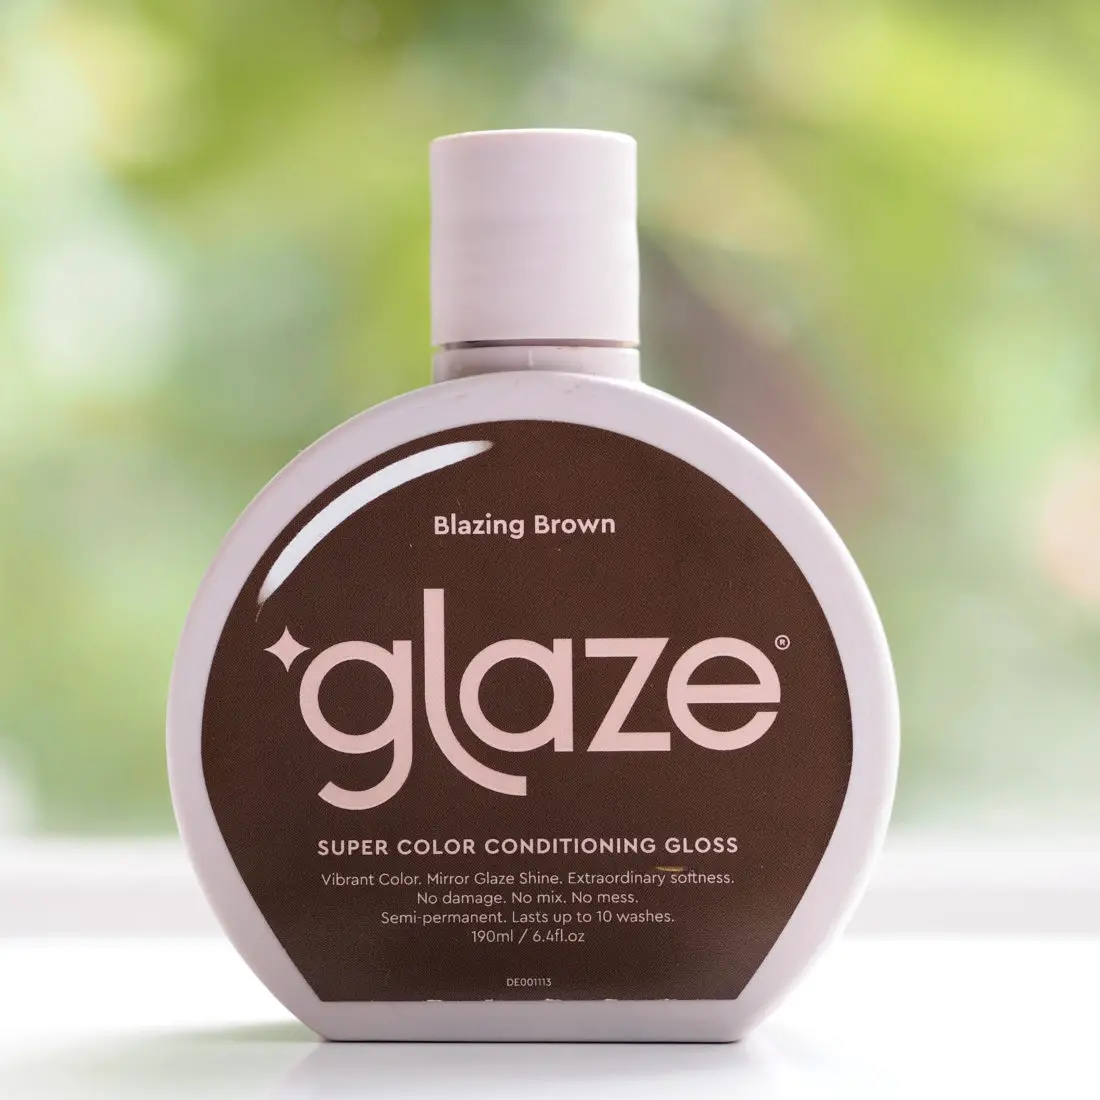 Shop All Hair Products - Glaze Conditioning Gloss - Glaze